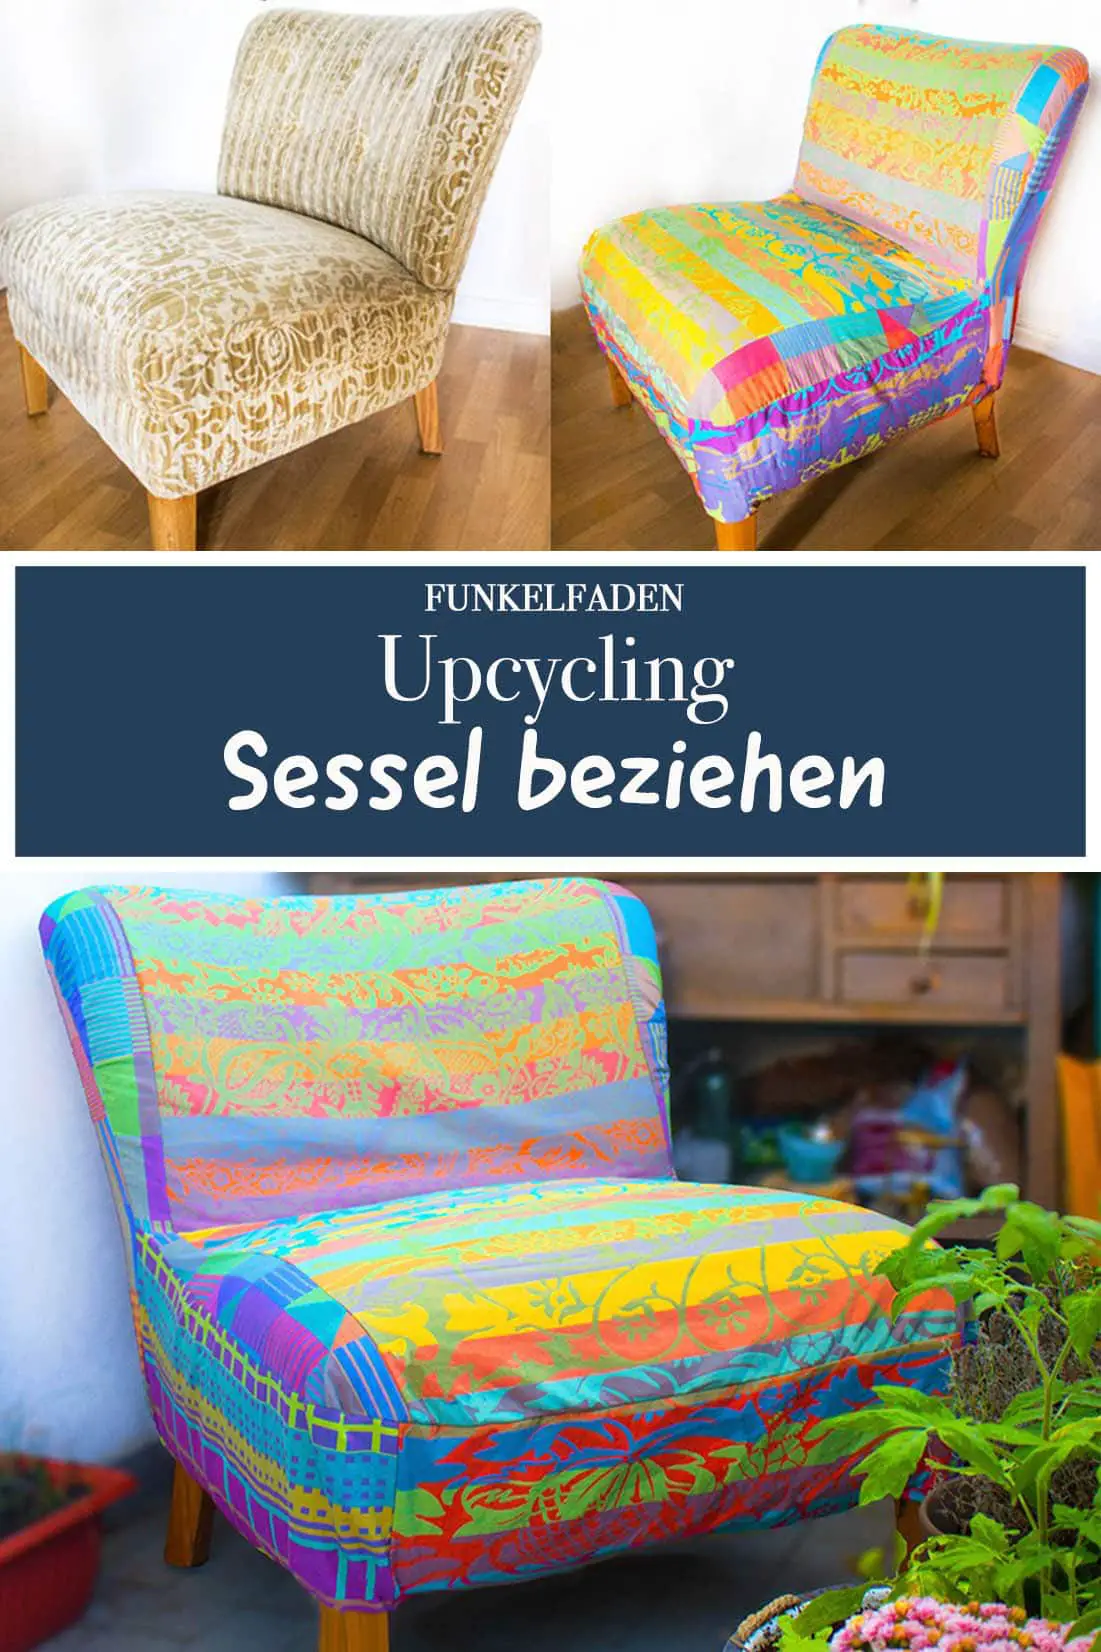 Upcycling Sessel beziehen